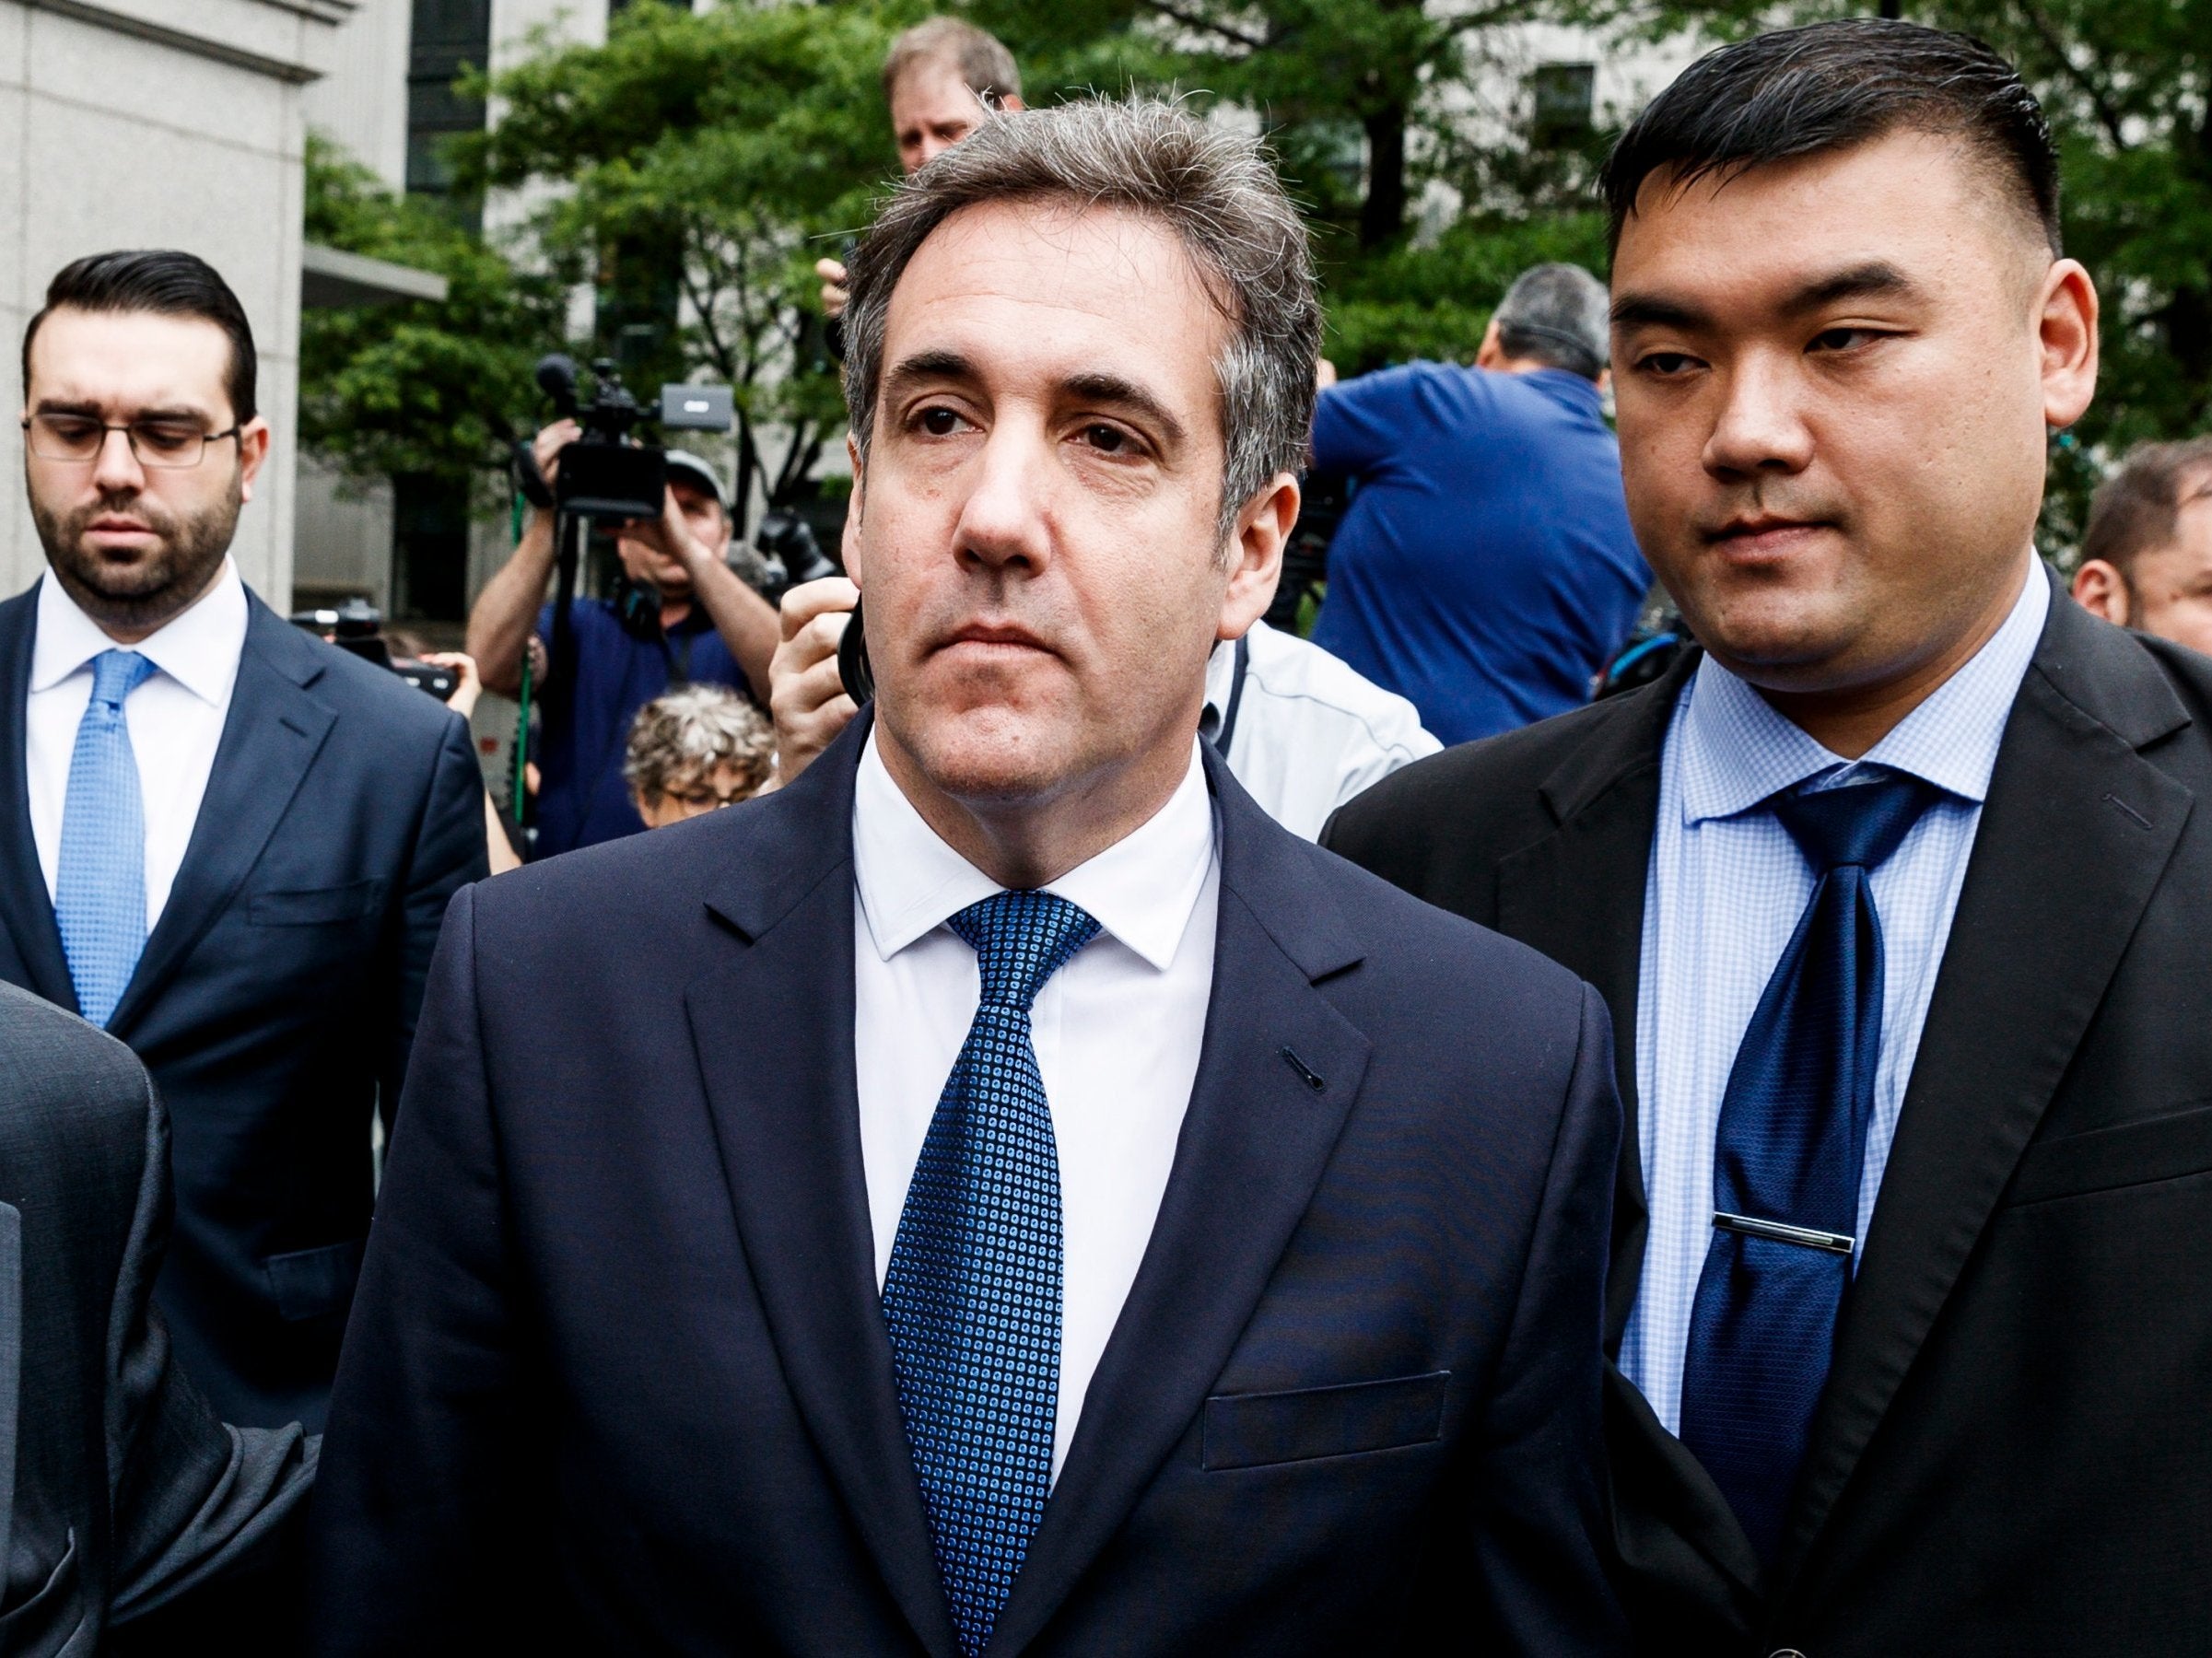 Michael Cohen says Donald Trump will flee to Maralago and will never return to the White House